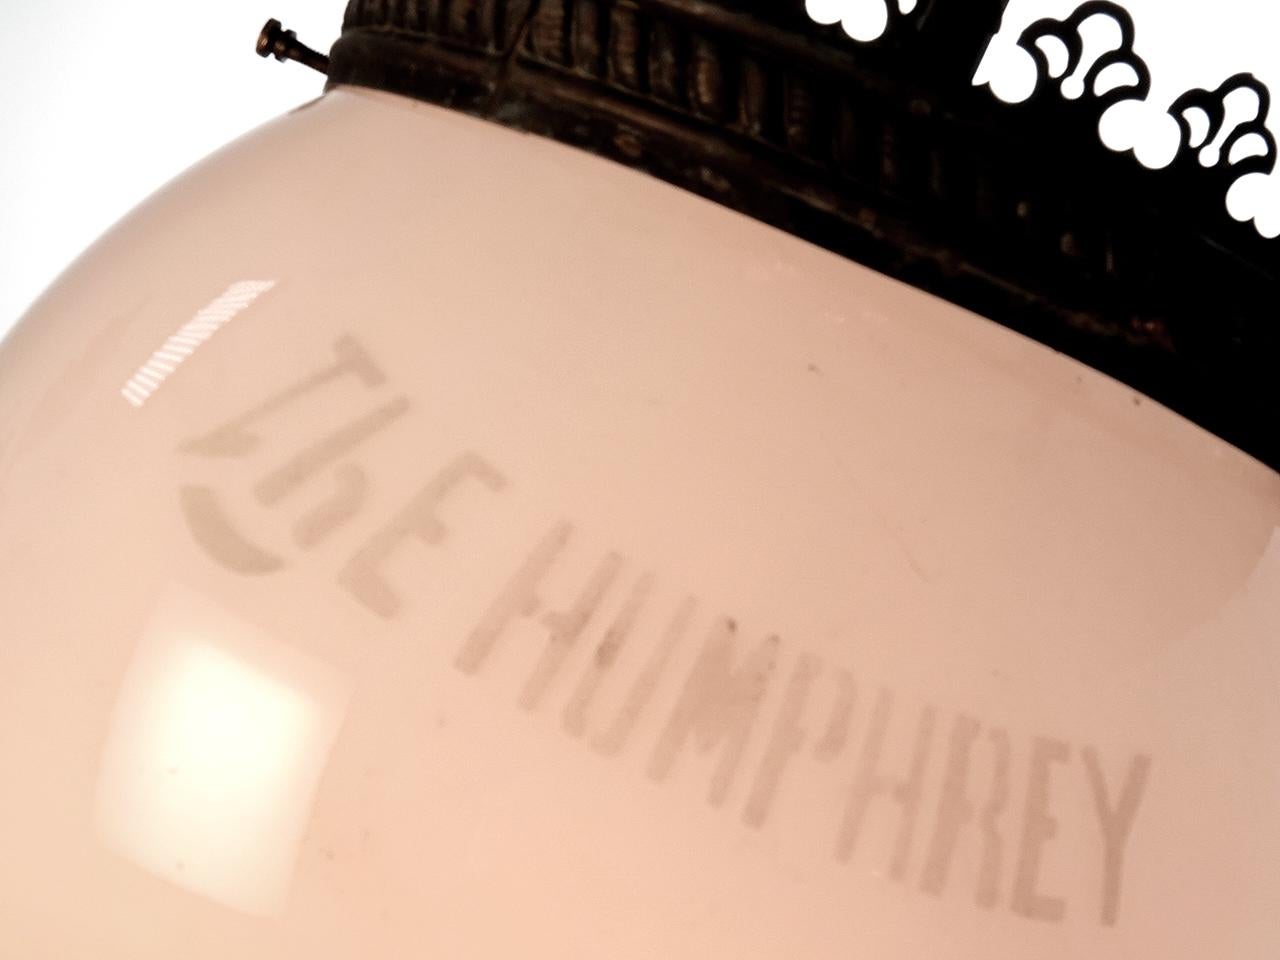 This early lamp is signed on the original glass globe and the brass base. Its one of Humphreys earliest lamps. The Humphrey Lamp Company has been around since 1901 and they are still manufacturing. Their large fixtures were used to light streets in